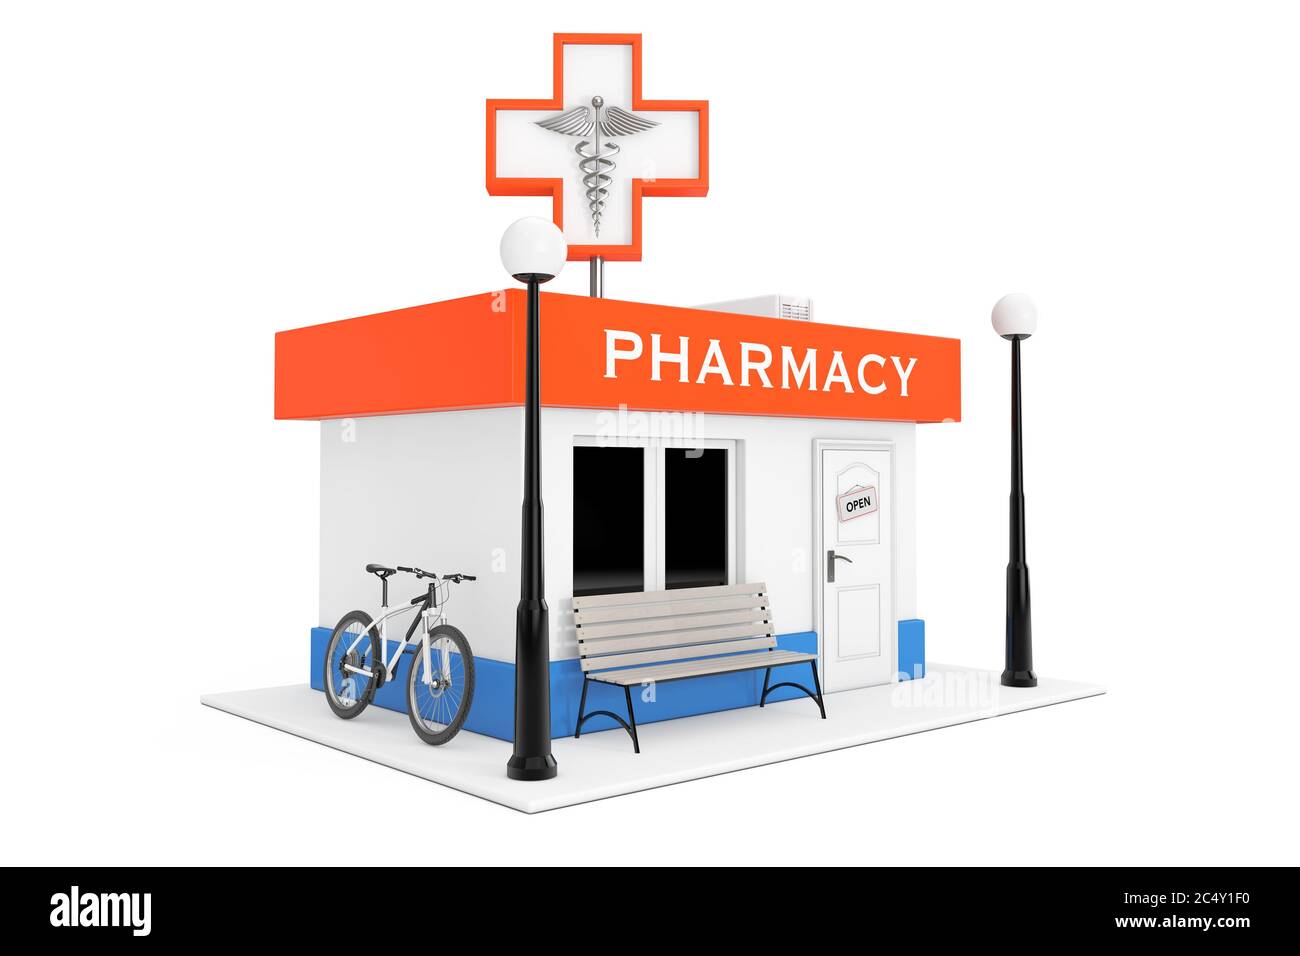 Pharmacy Drugstore Shop Building on a white background. 3d Rendering Stock Photo